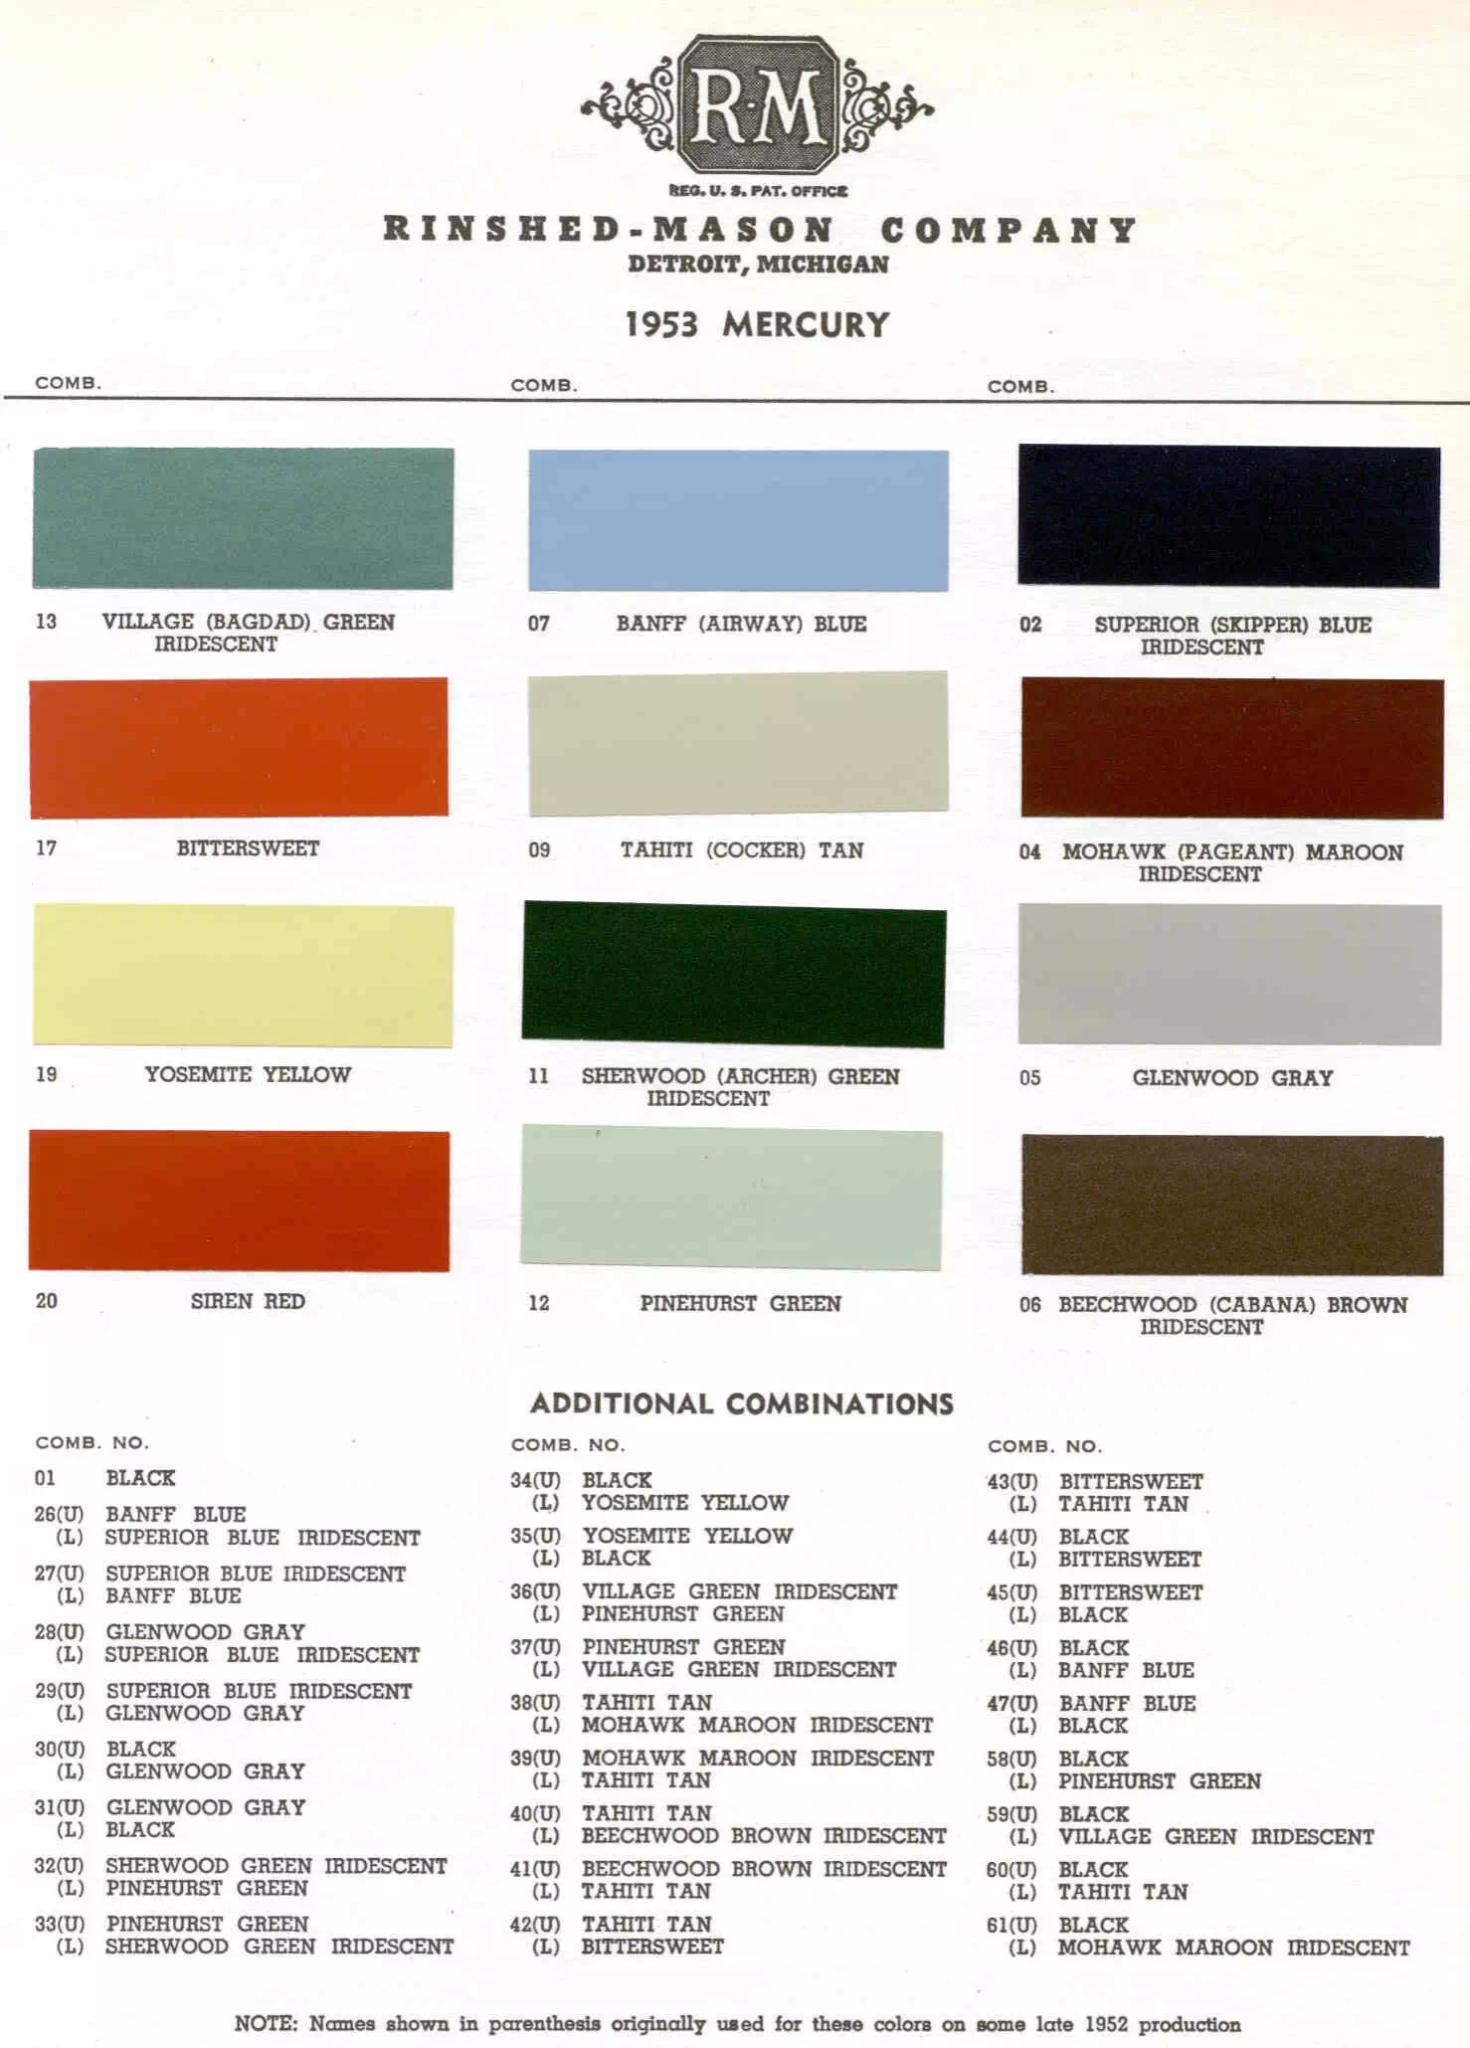 exterior colors, thier codes, and example swatches used on the exterior of the vehicles in 1953